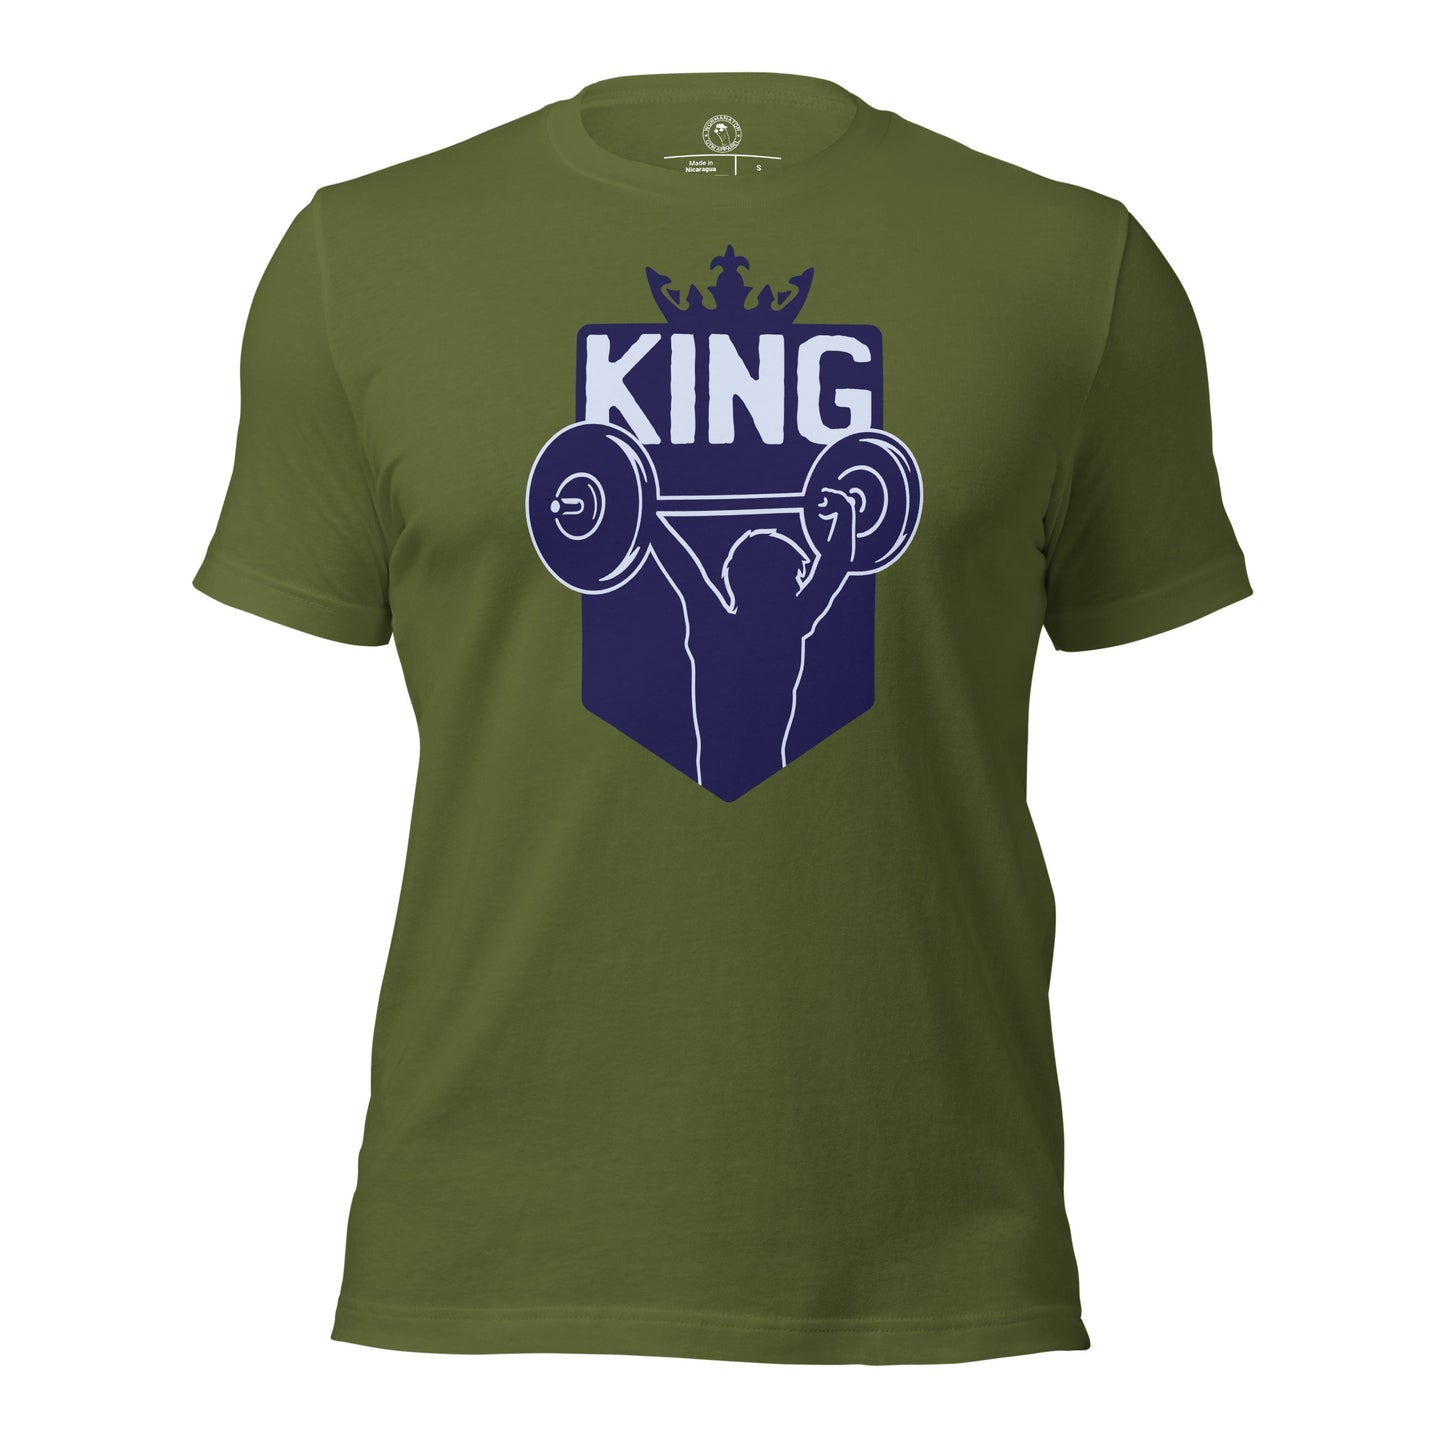 Gym King Shirt in Olive Green